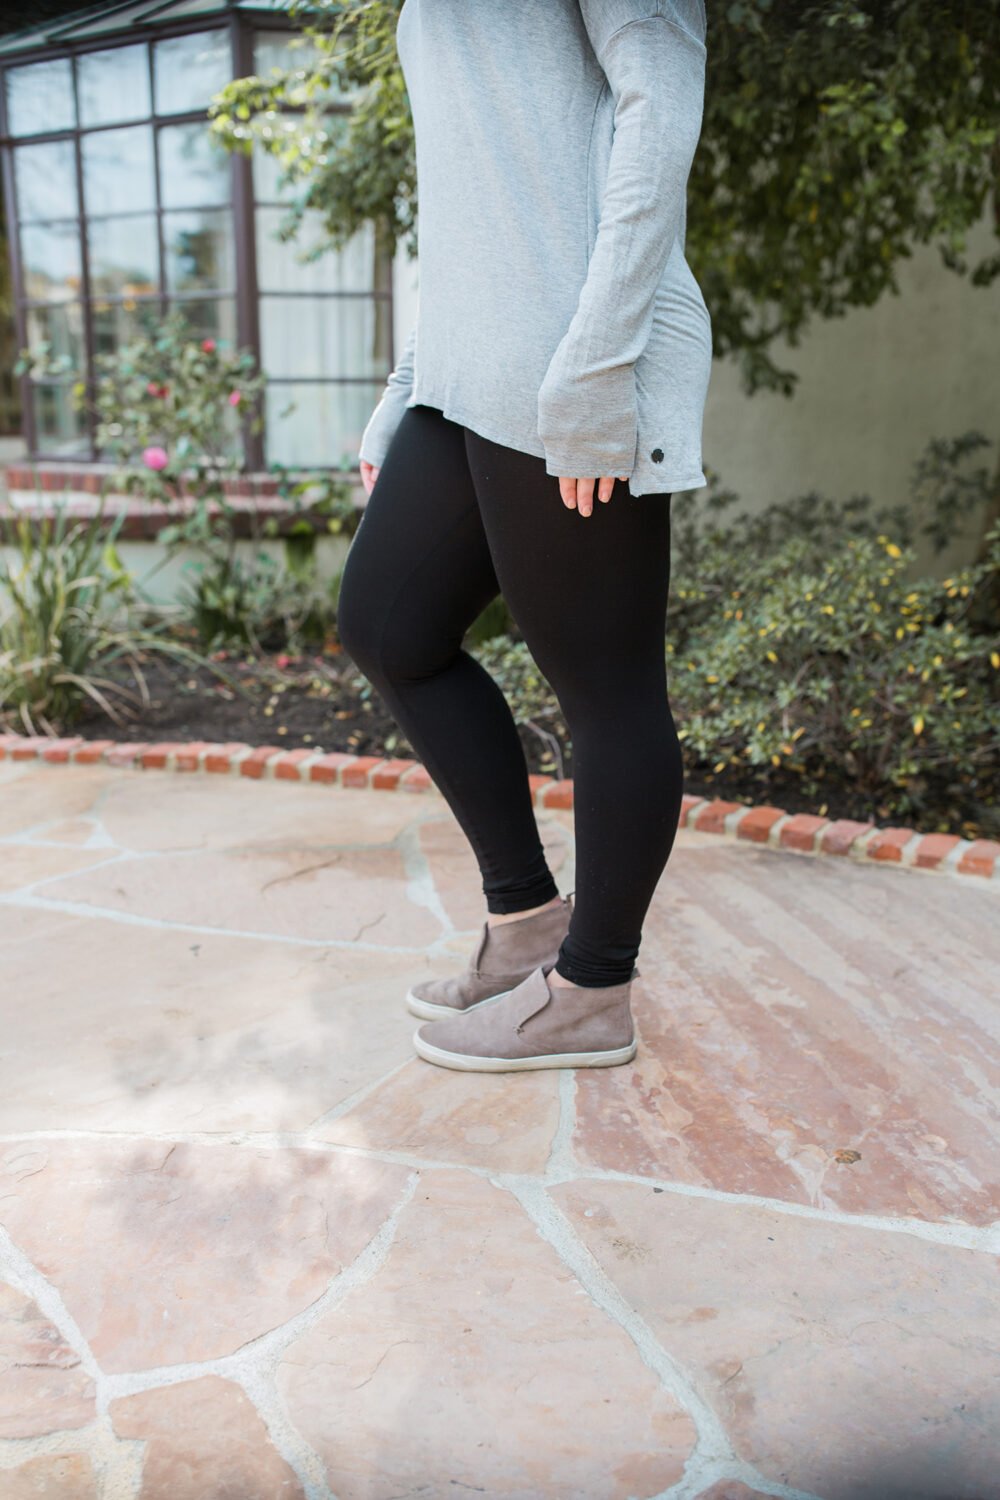 Looking for the best black leggings for a pear shaped body?!? These SPANX leggings are an amazing fit!